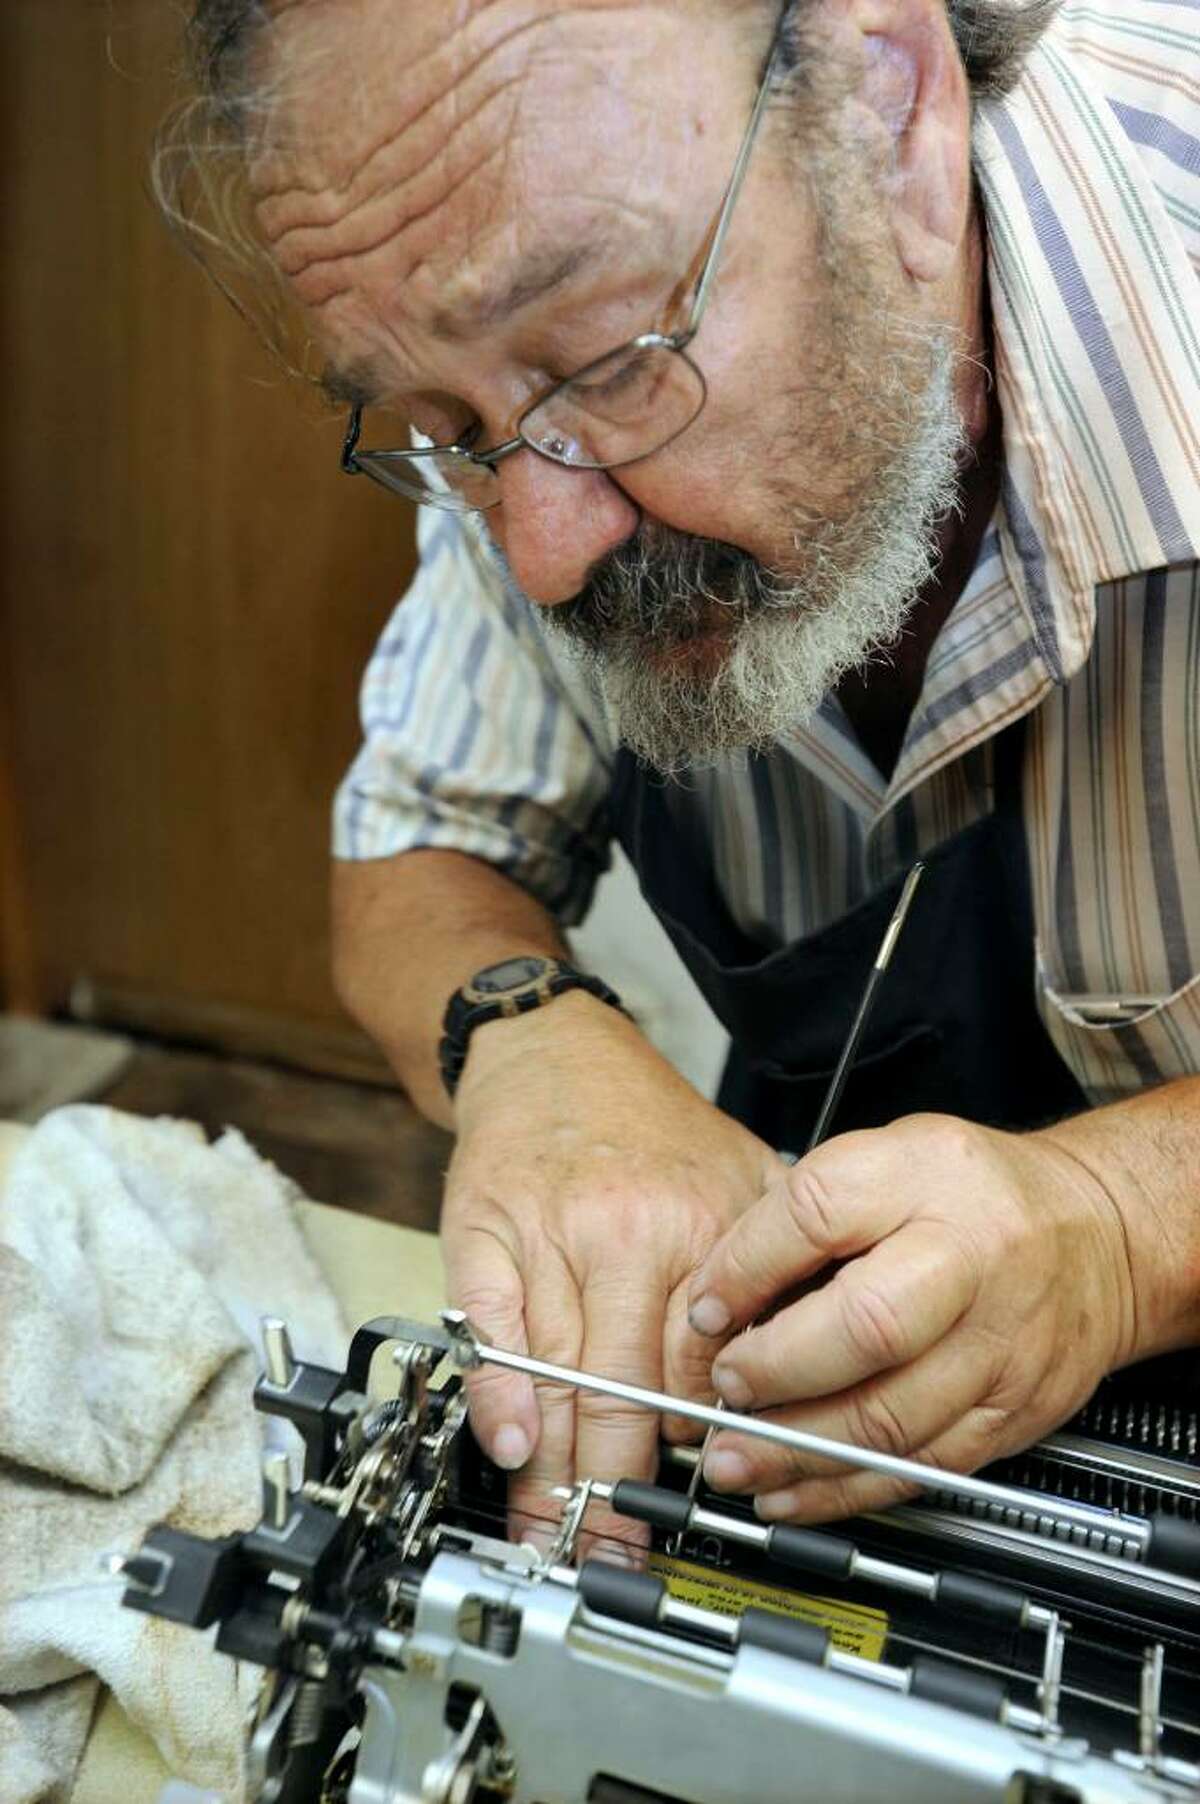 He flunked the typing course in high school, but David Morrill has been expertly fixing every kind of typewriter for over 30 years.